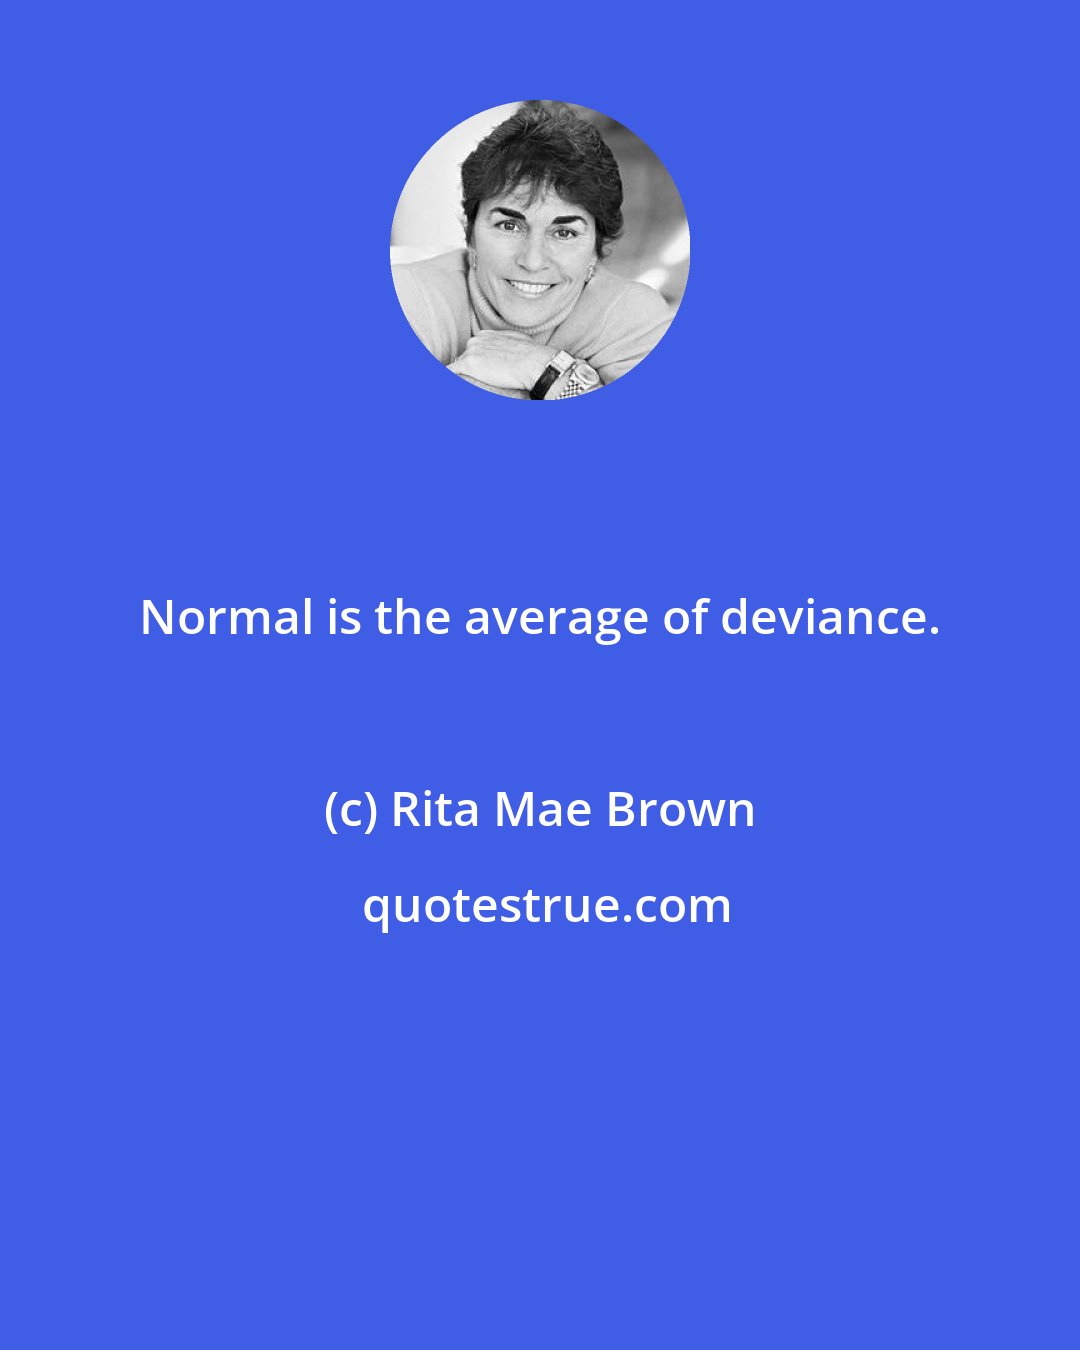 Rita Mae Brown: Normal is the average of deviance.